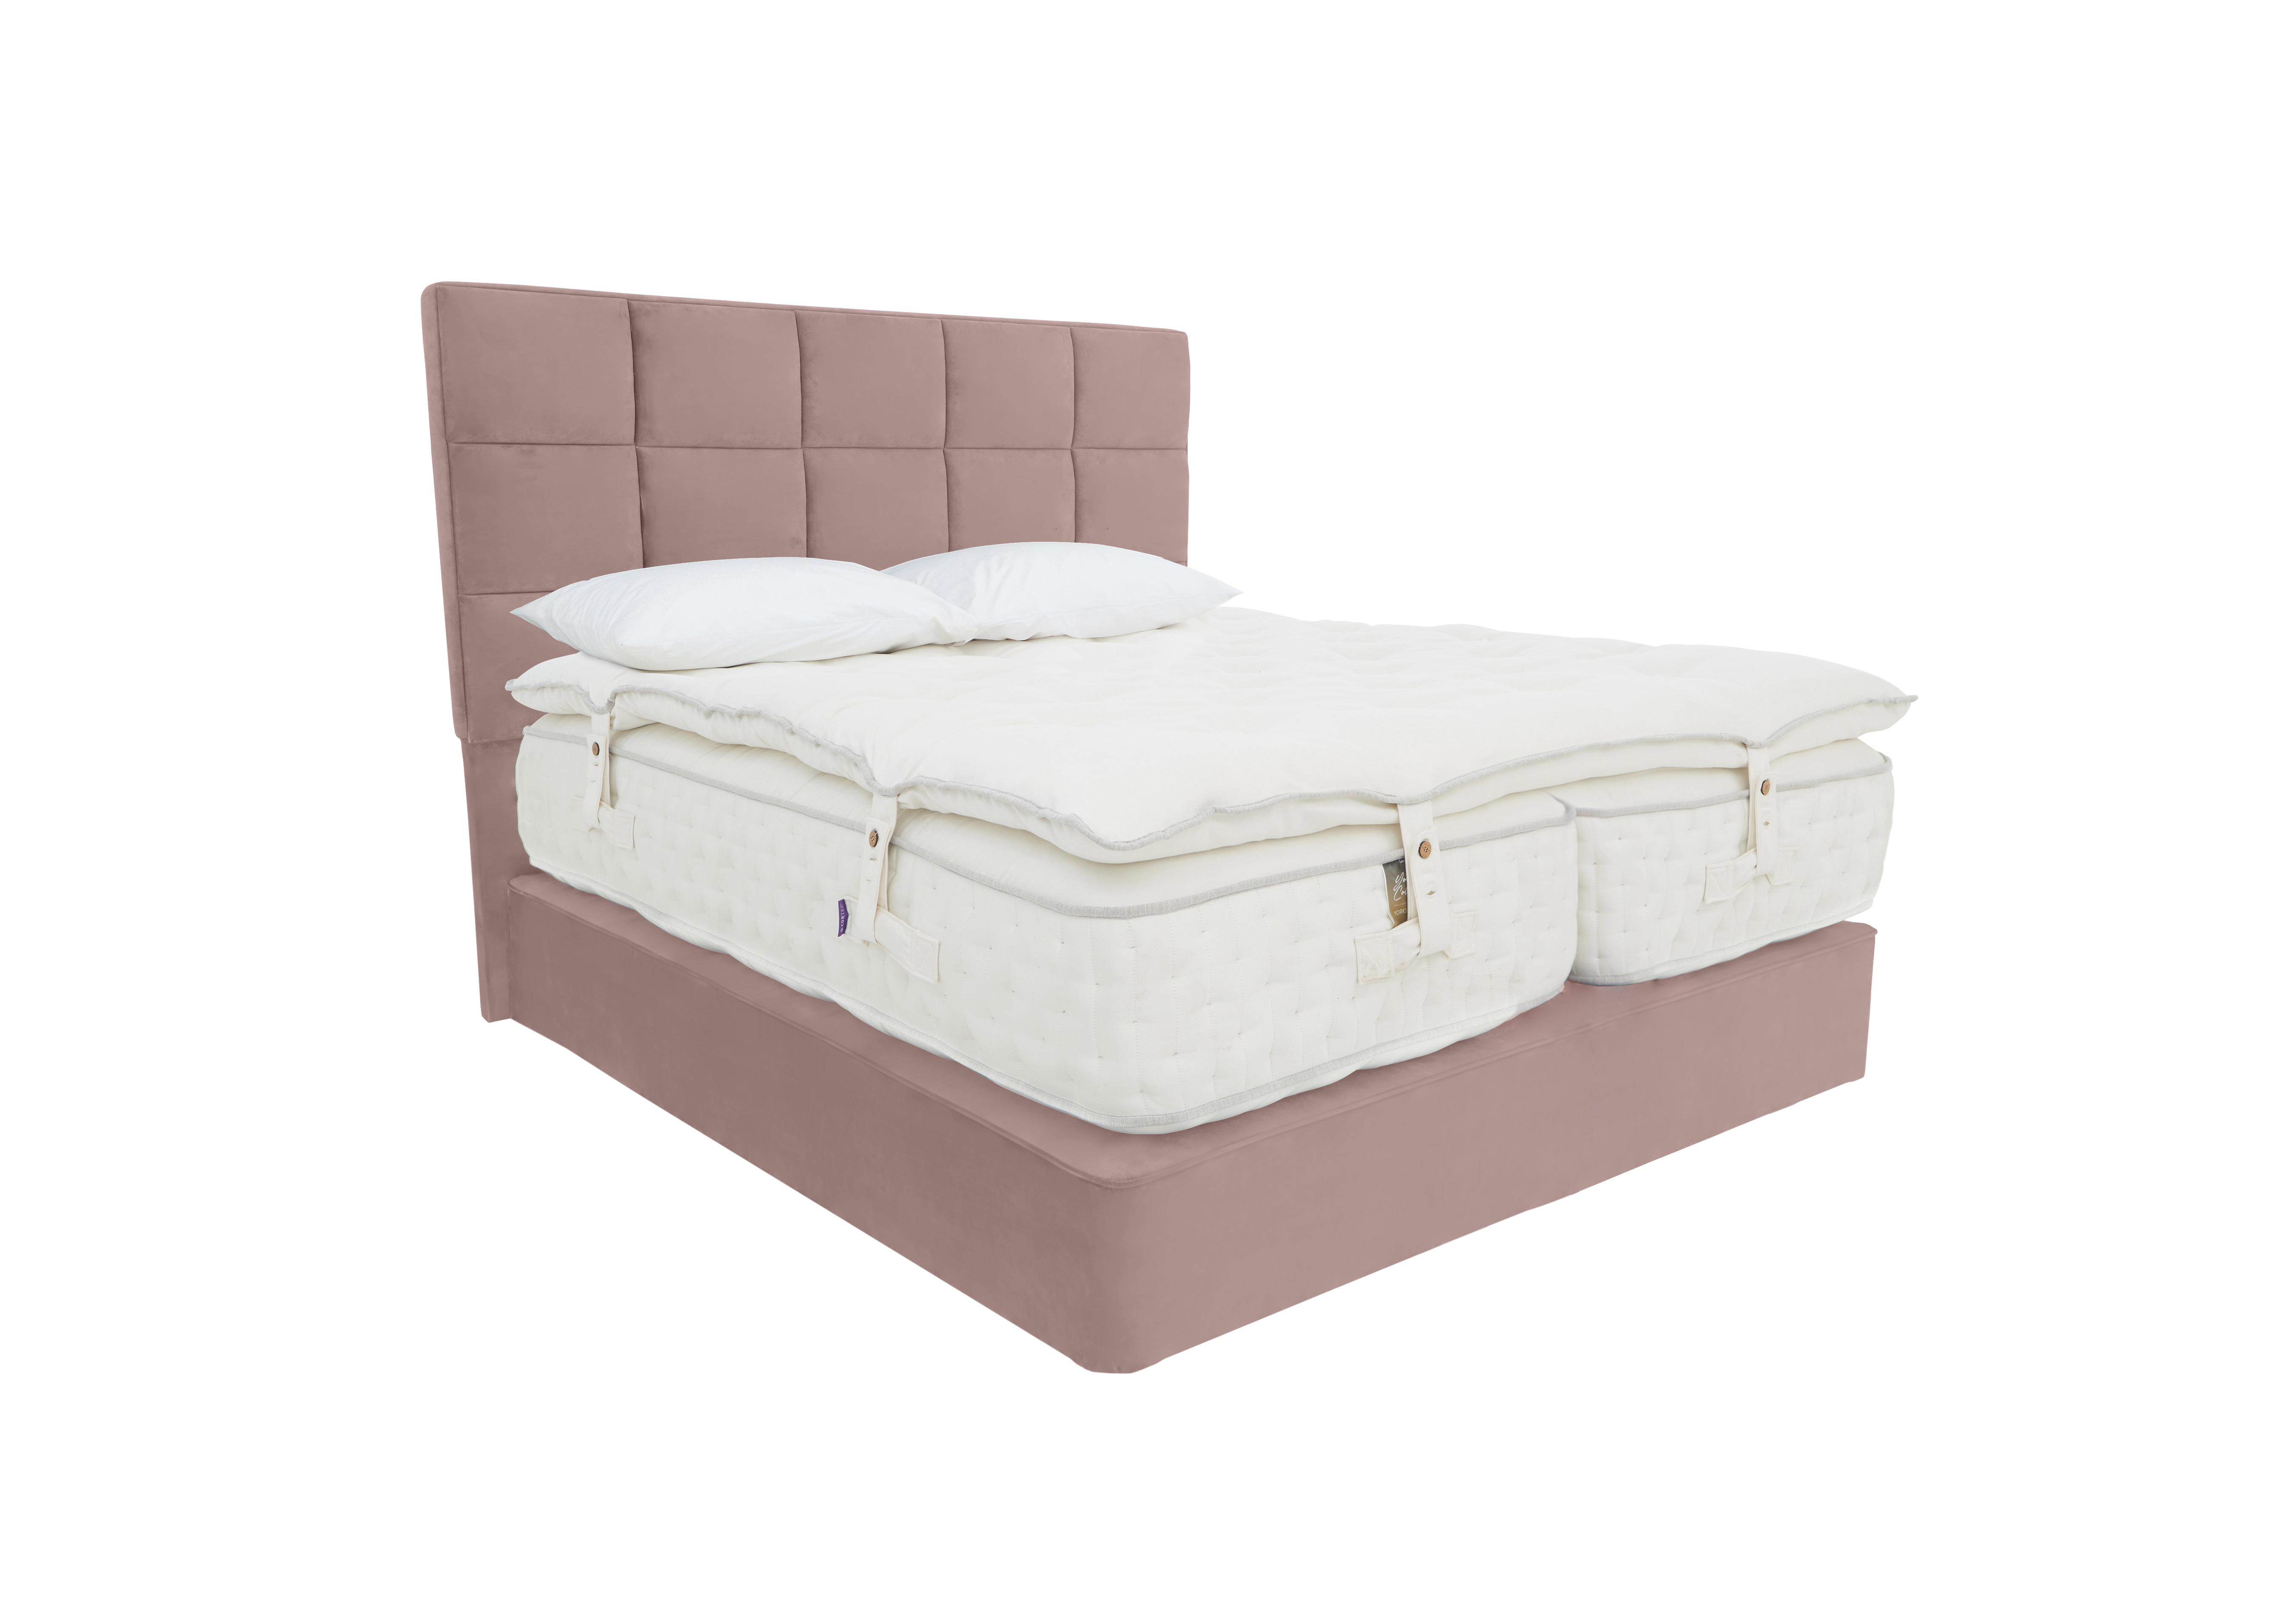 Yorkshire 30K Divan Set with Zip and Link Mattress with Mattress Topper in Seven Blossom on Furniture Village